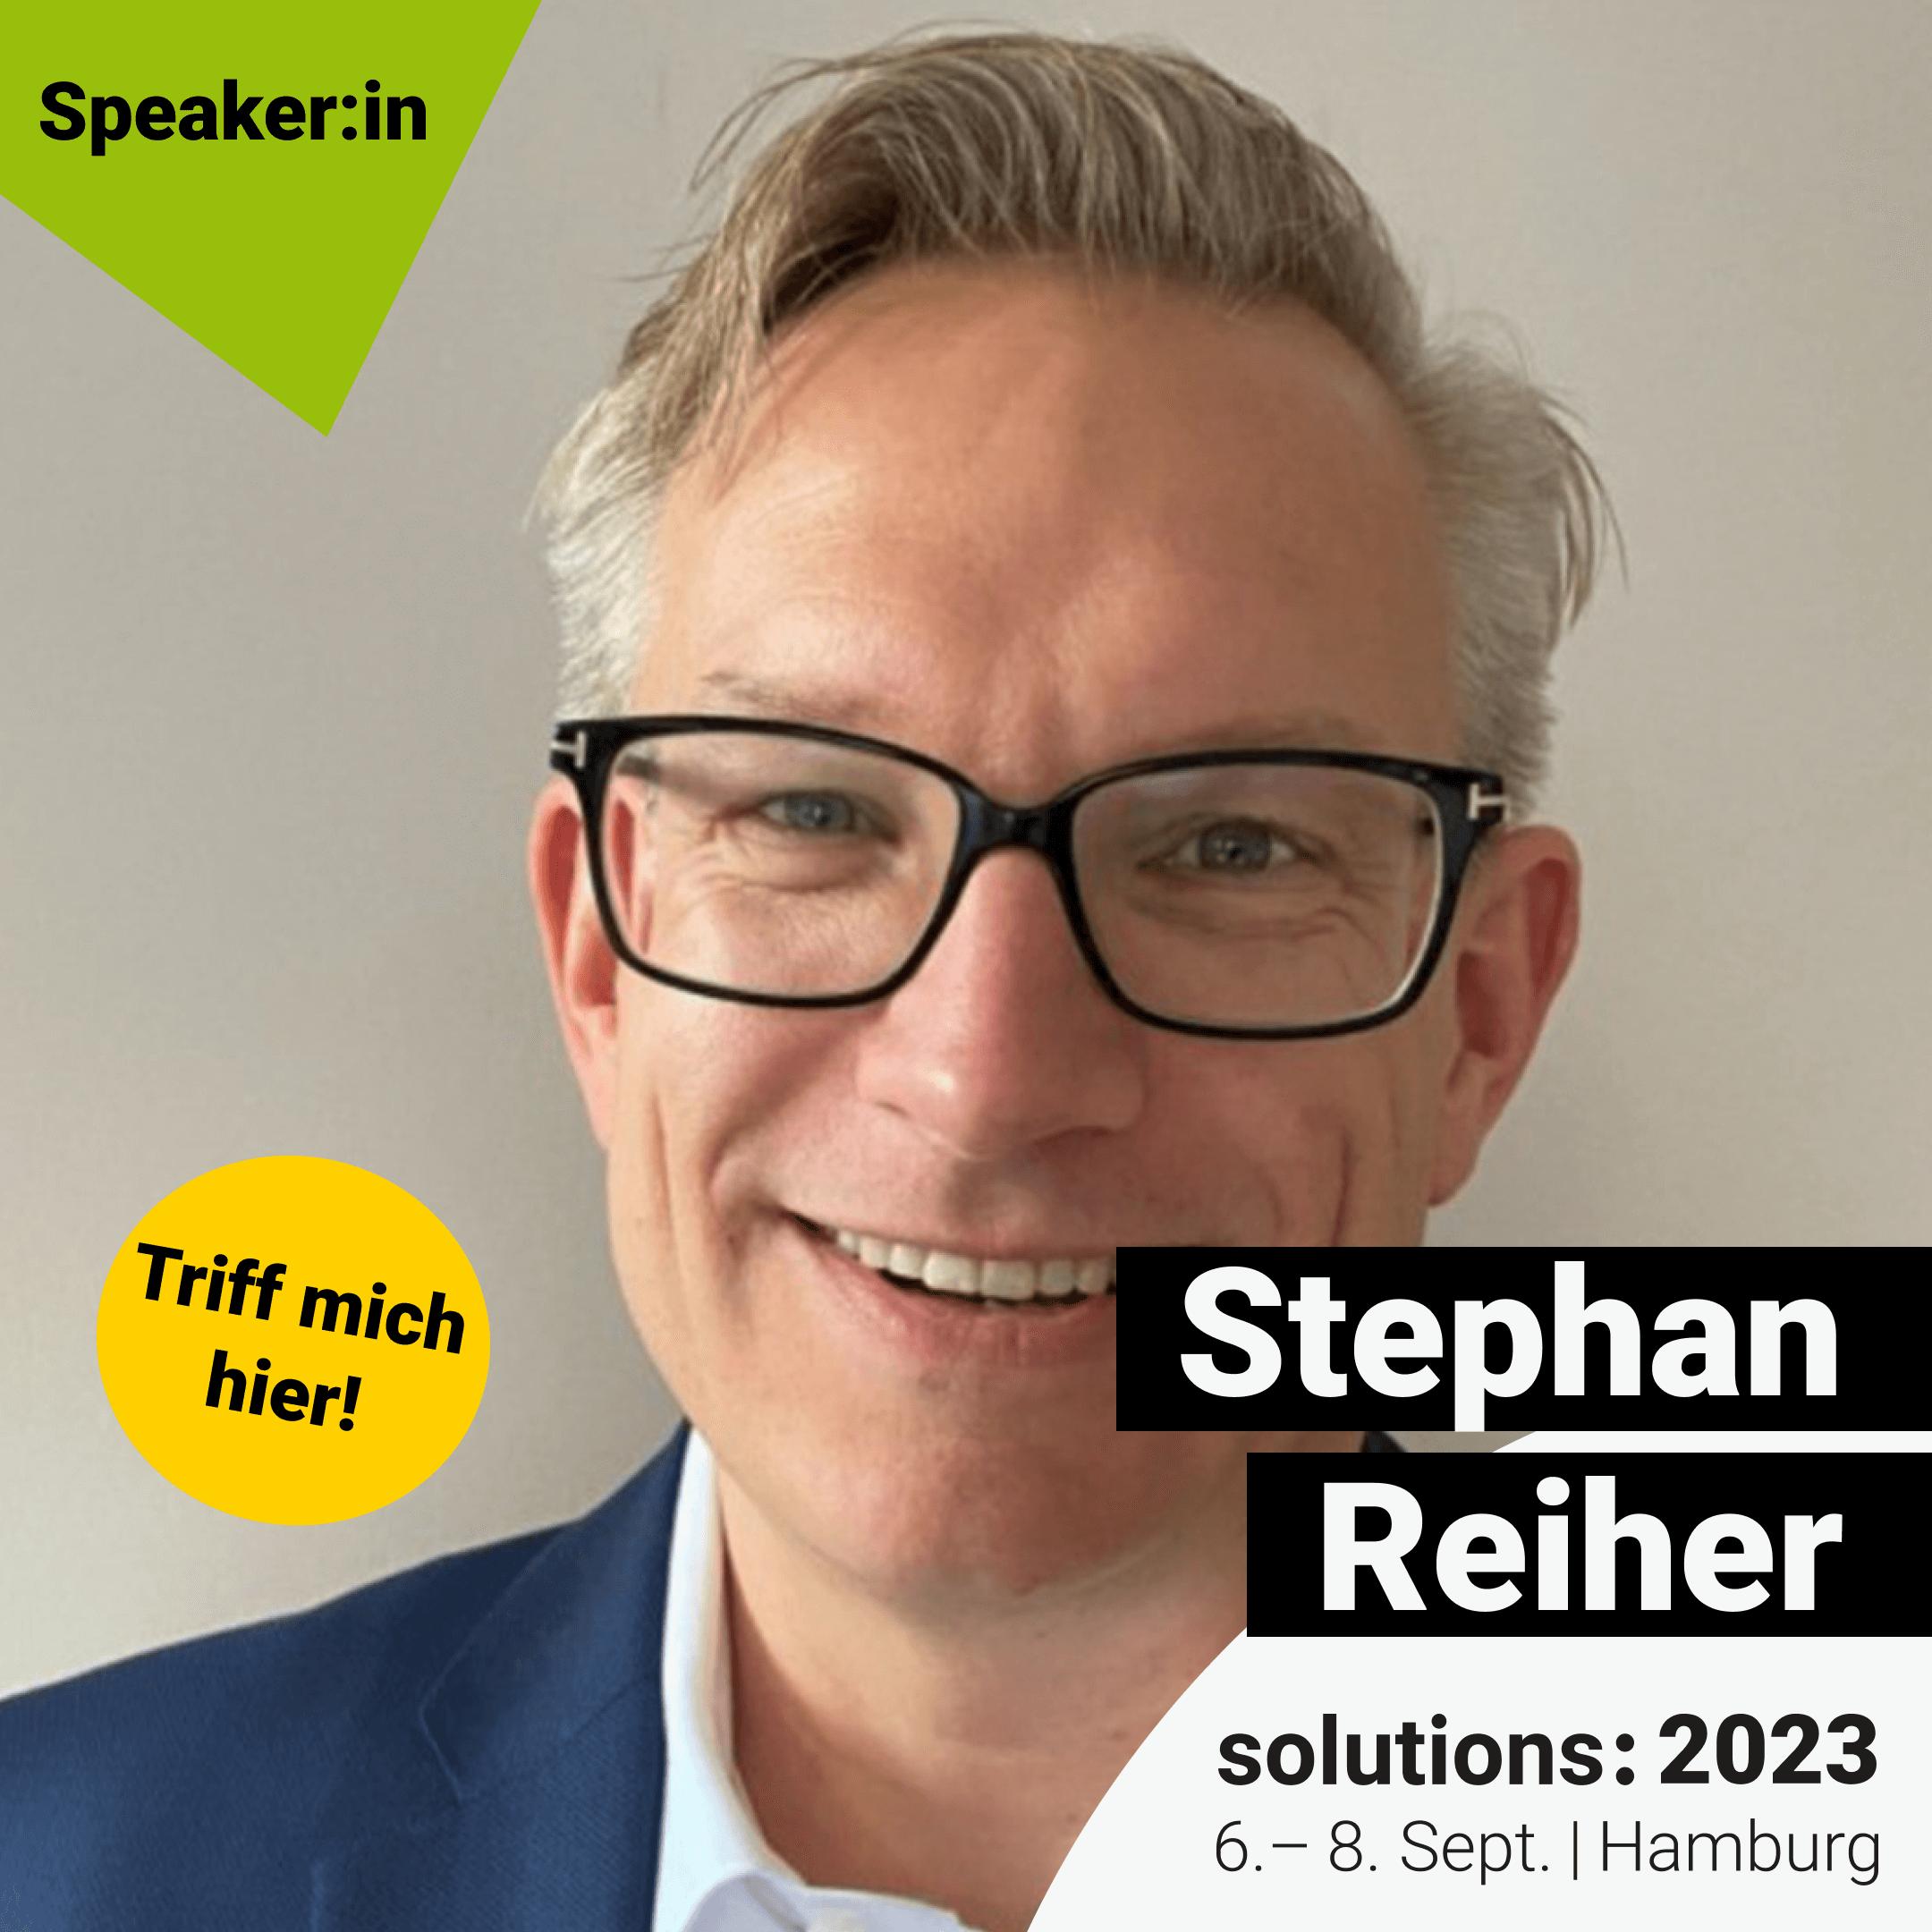 Image of Stephan Reiher - solutions: 2023